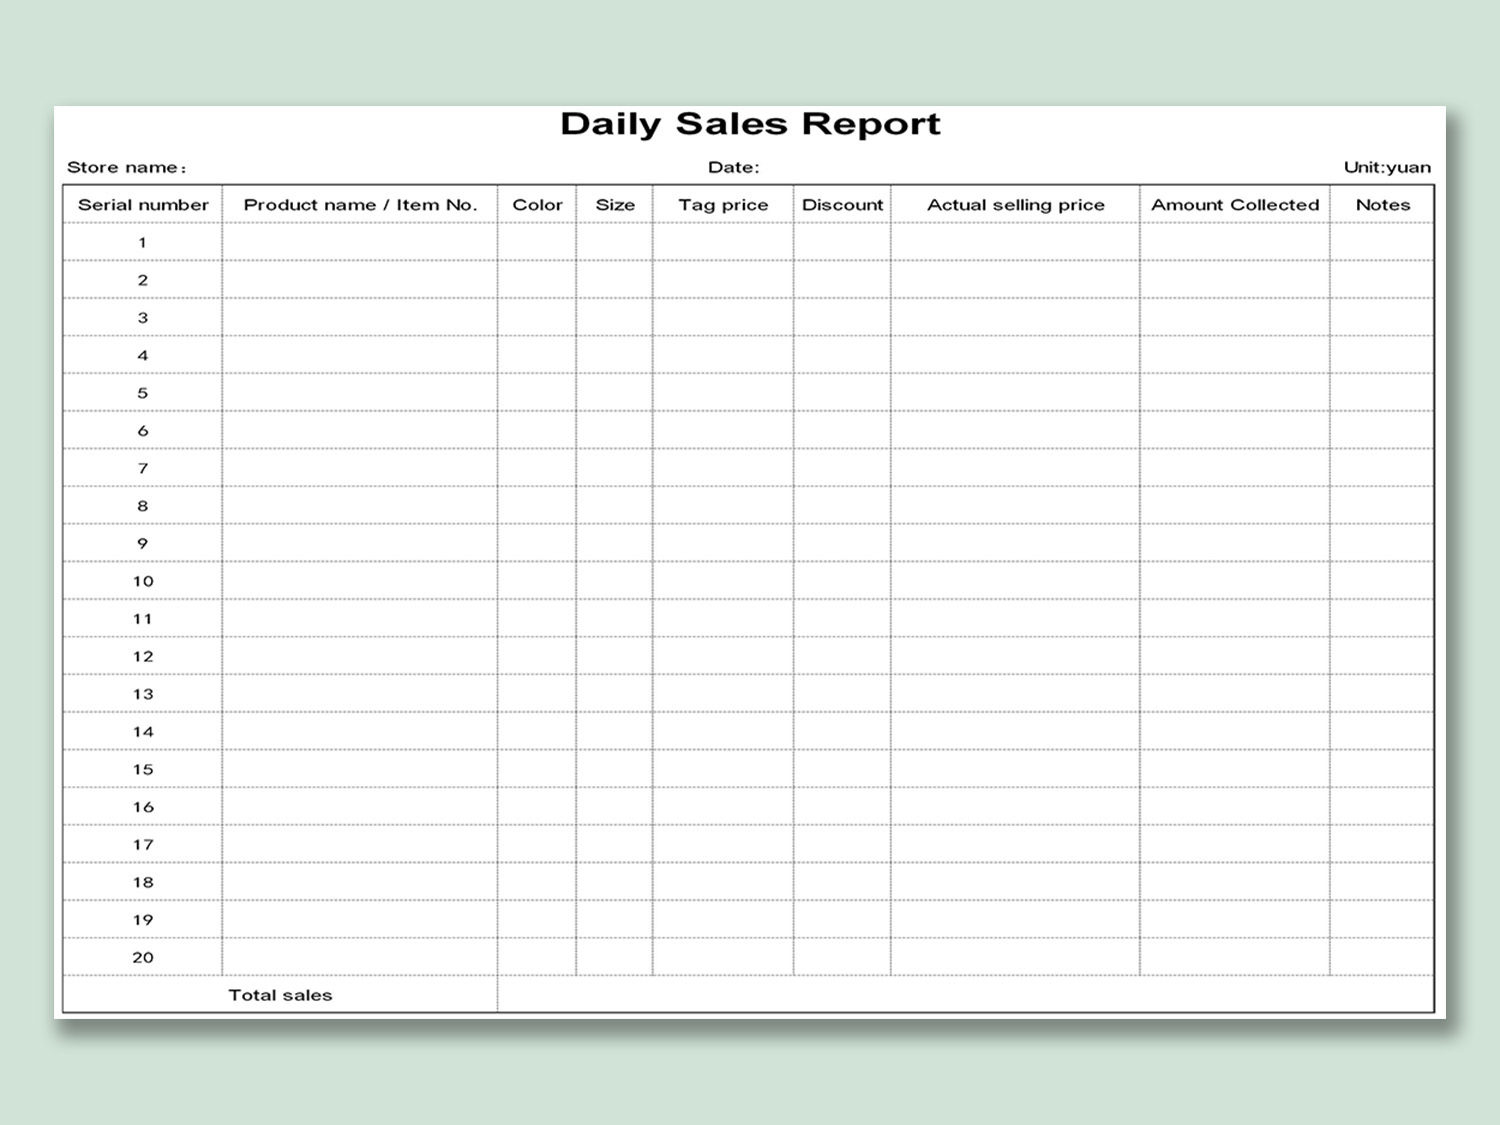 EXCEL of Daily Sales Report